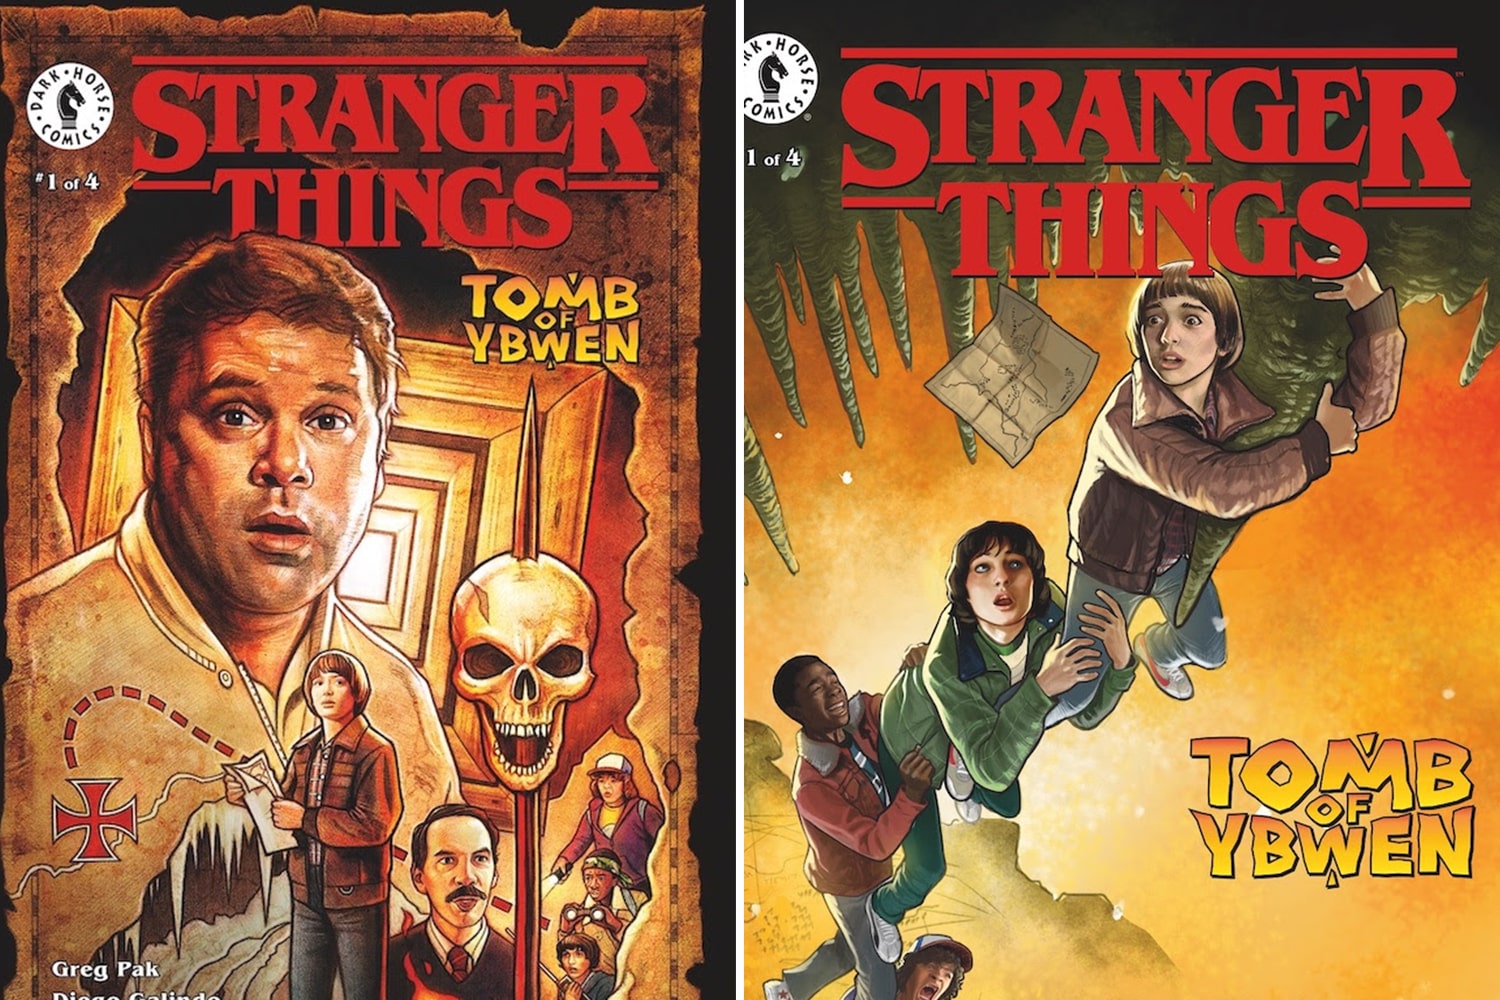 'Stranger Things: The Tomb of Ybwen' #1 is the start to a great eerie story